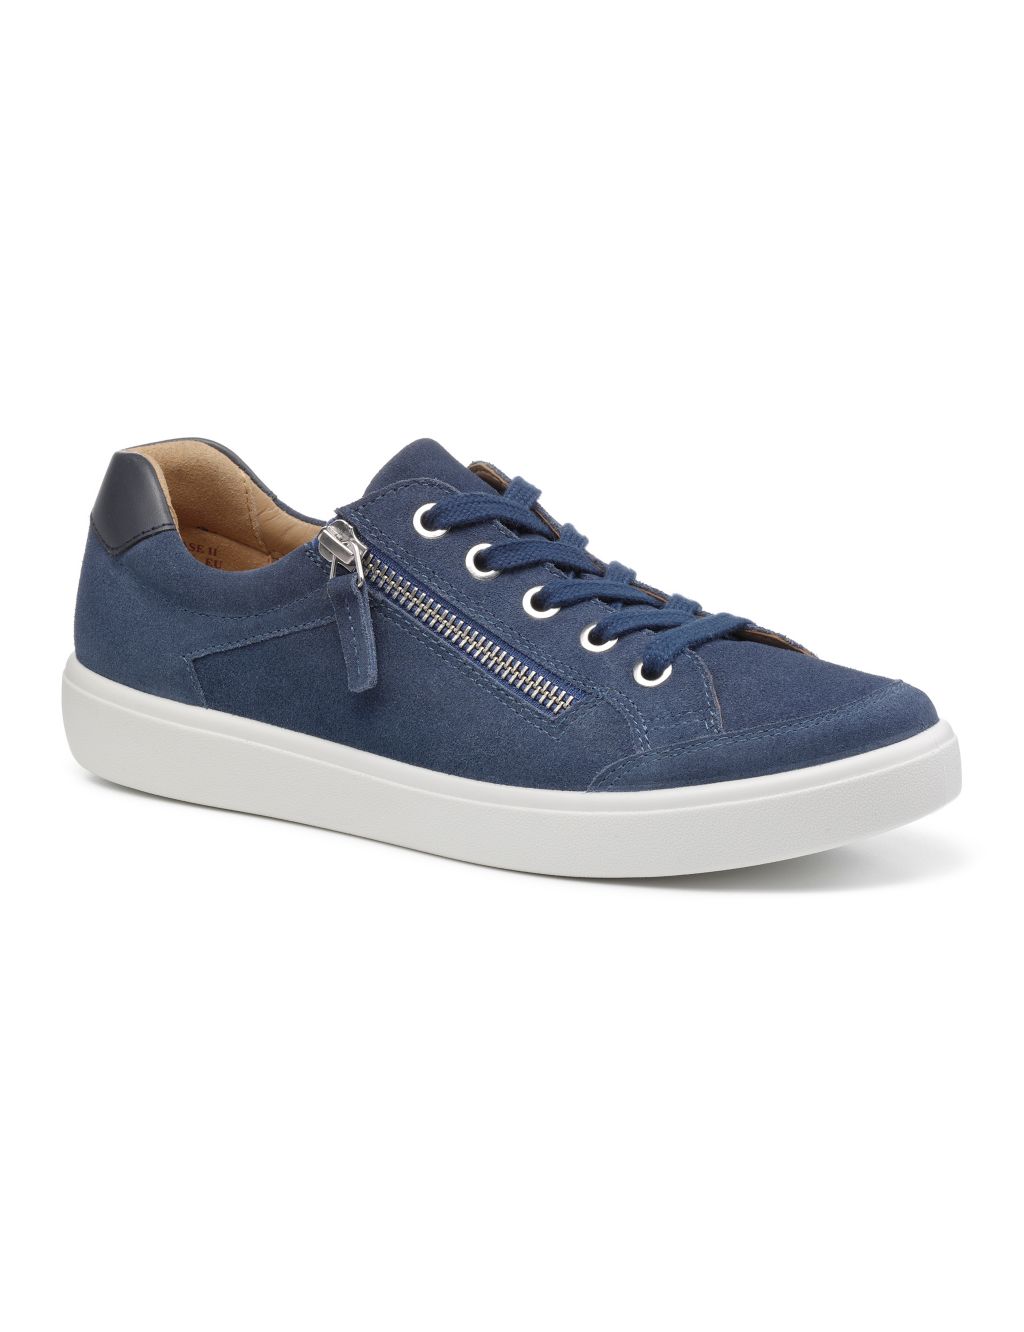 Chase Extra Wide Fit Leather Trainers image 3